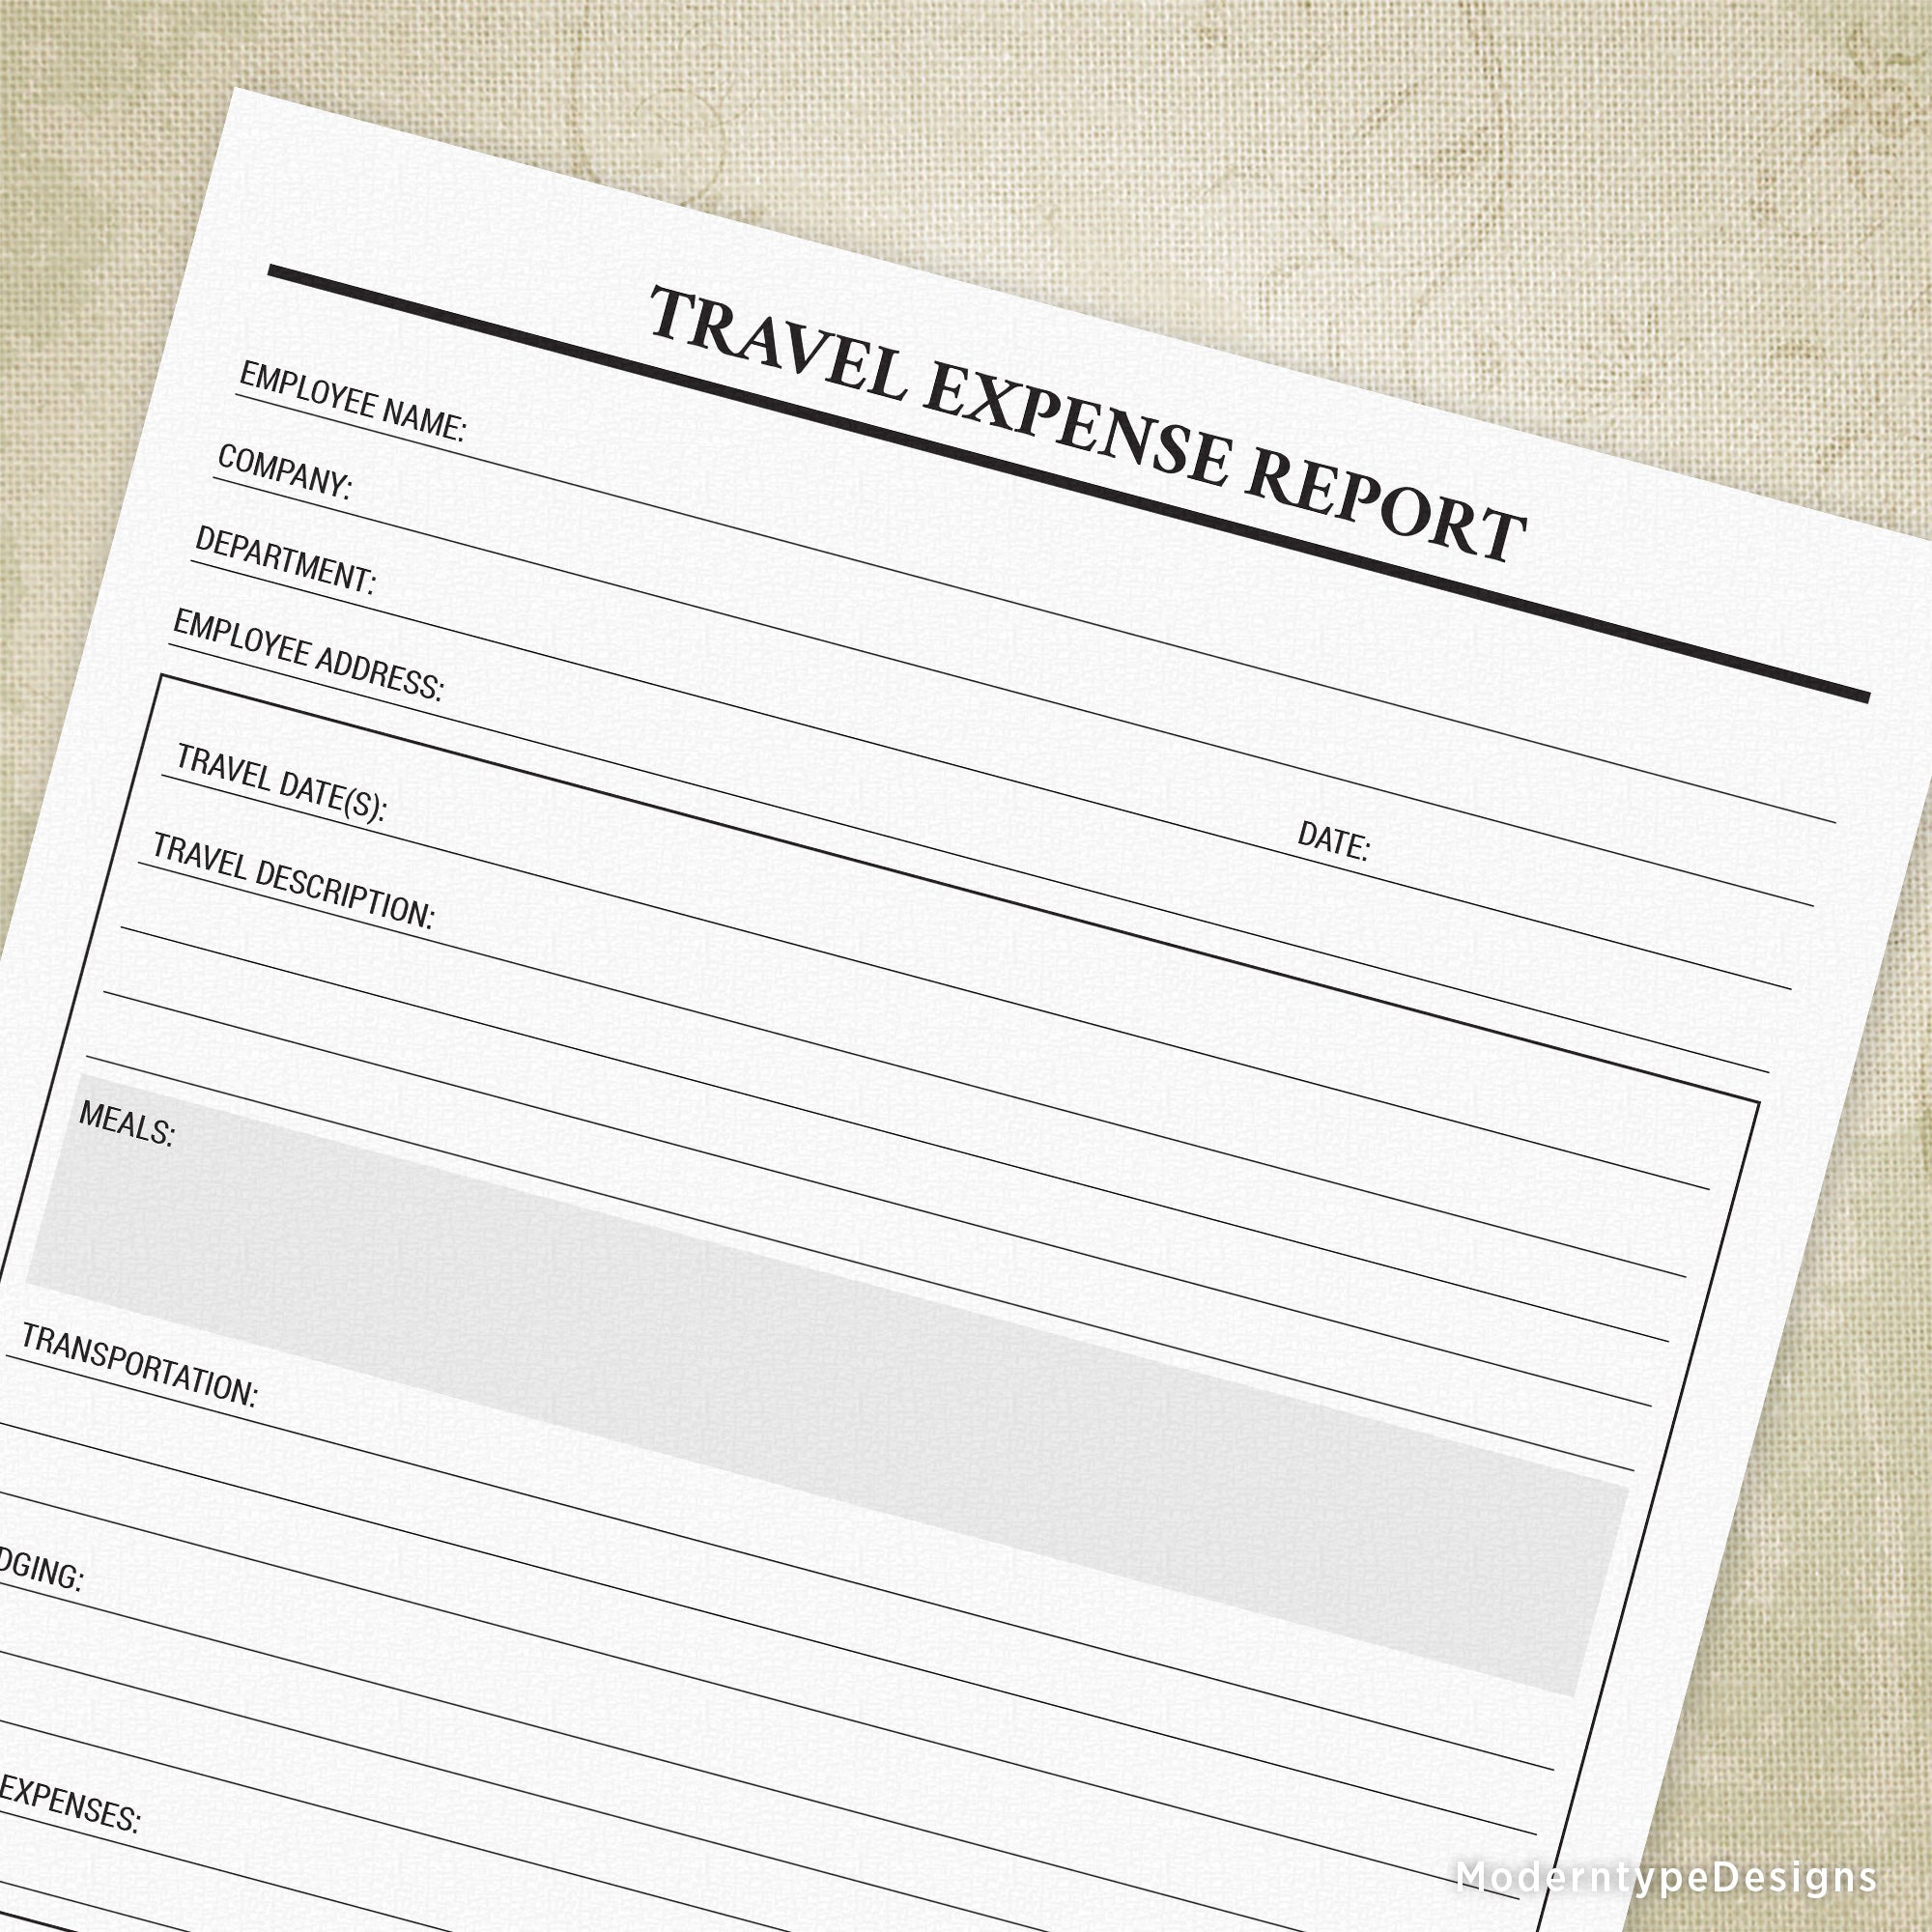 Travel Expense Report Printable Form